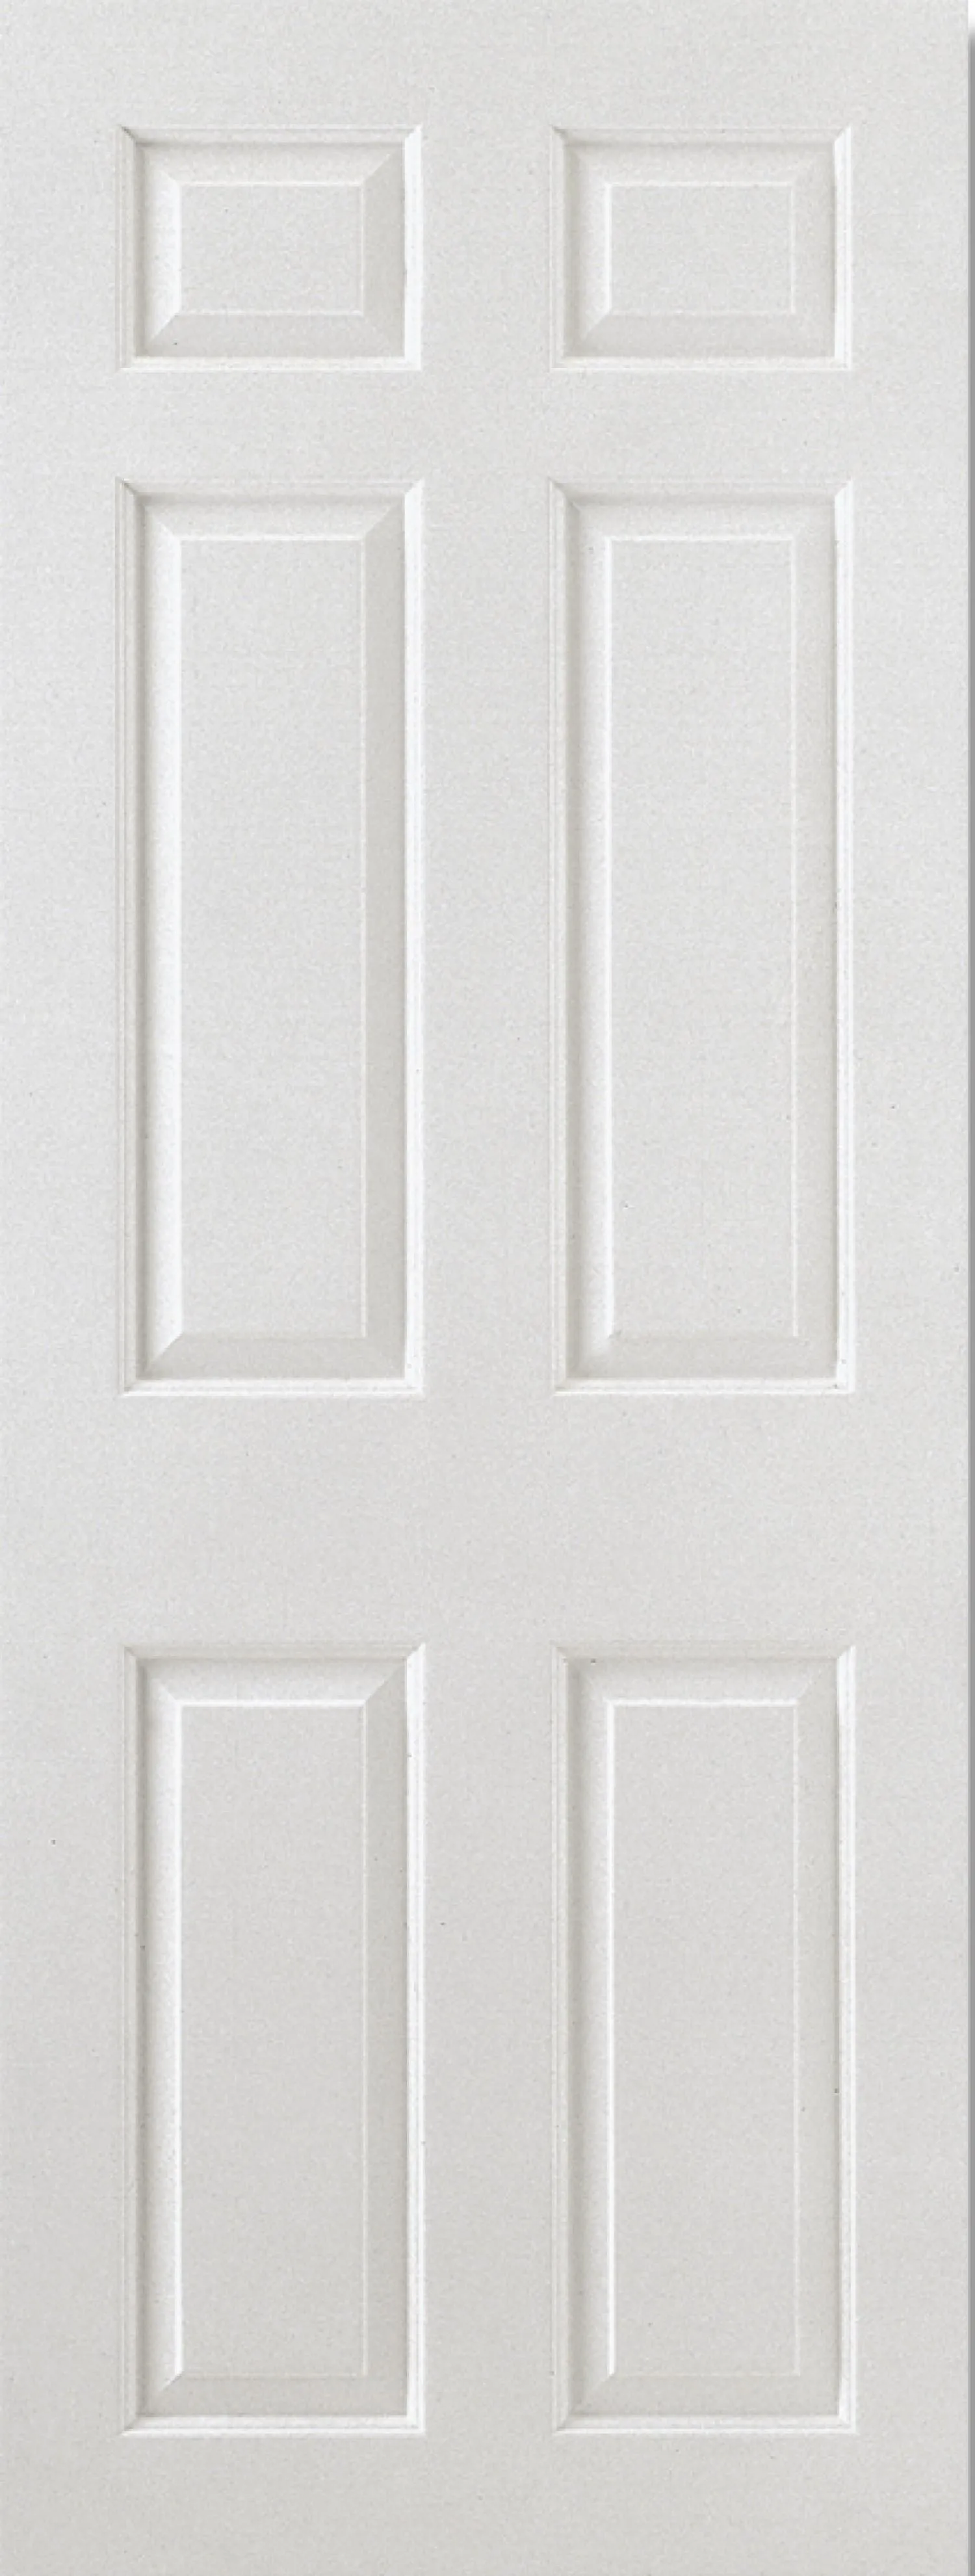 LPD Smooth 6P Square Top Internal Fire Door 1981 x 686 (27") Primed White Composite